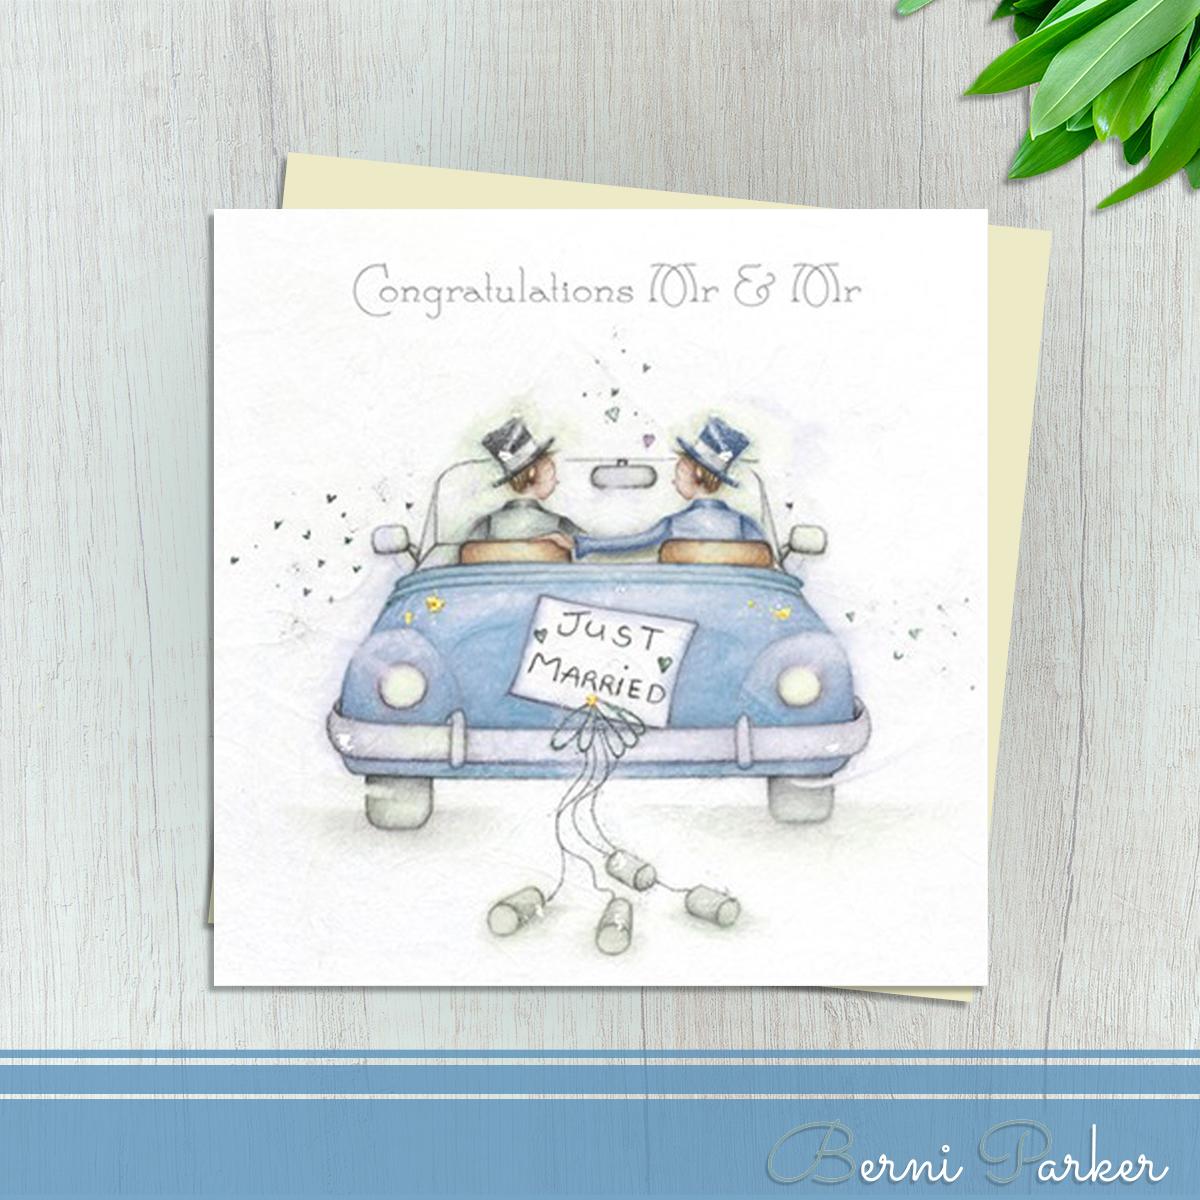 Two Grooms On Their Wedding Day Shown In the Wedding Car. Finished With Silver Accents And Complete With An Ivory Envelope